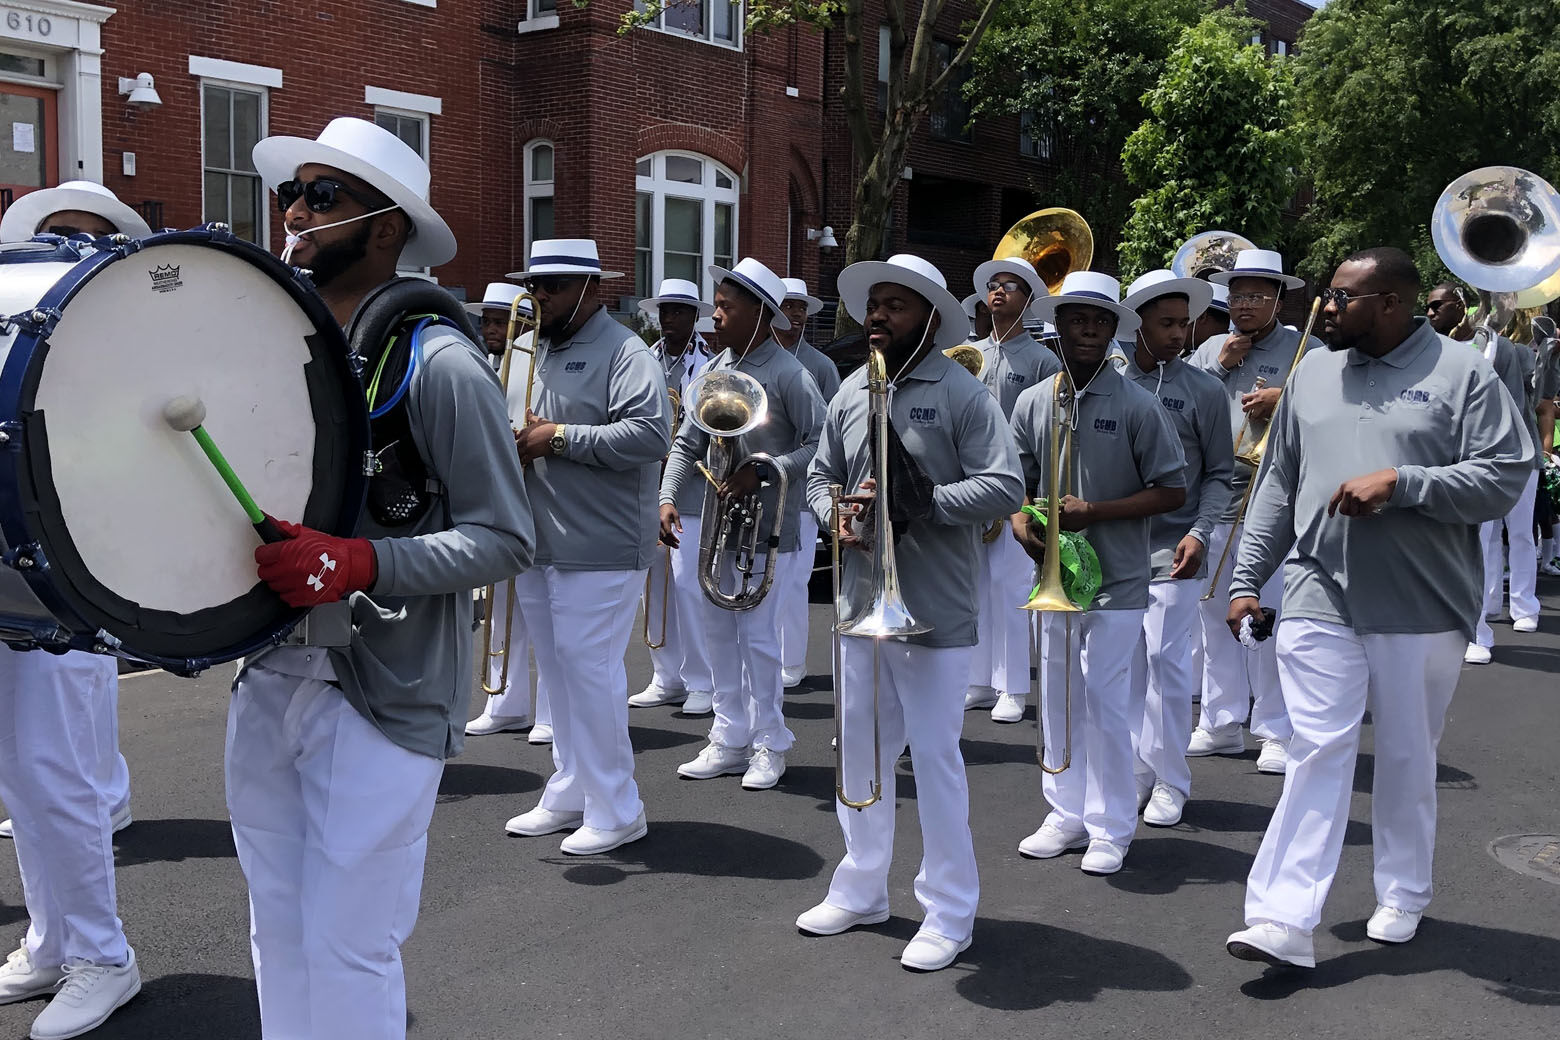 Marching bands participate in the United House of Prayer for All People parade (WTOP/Dick Uliano)